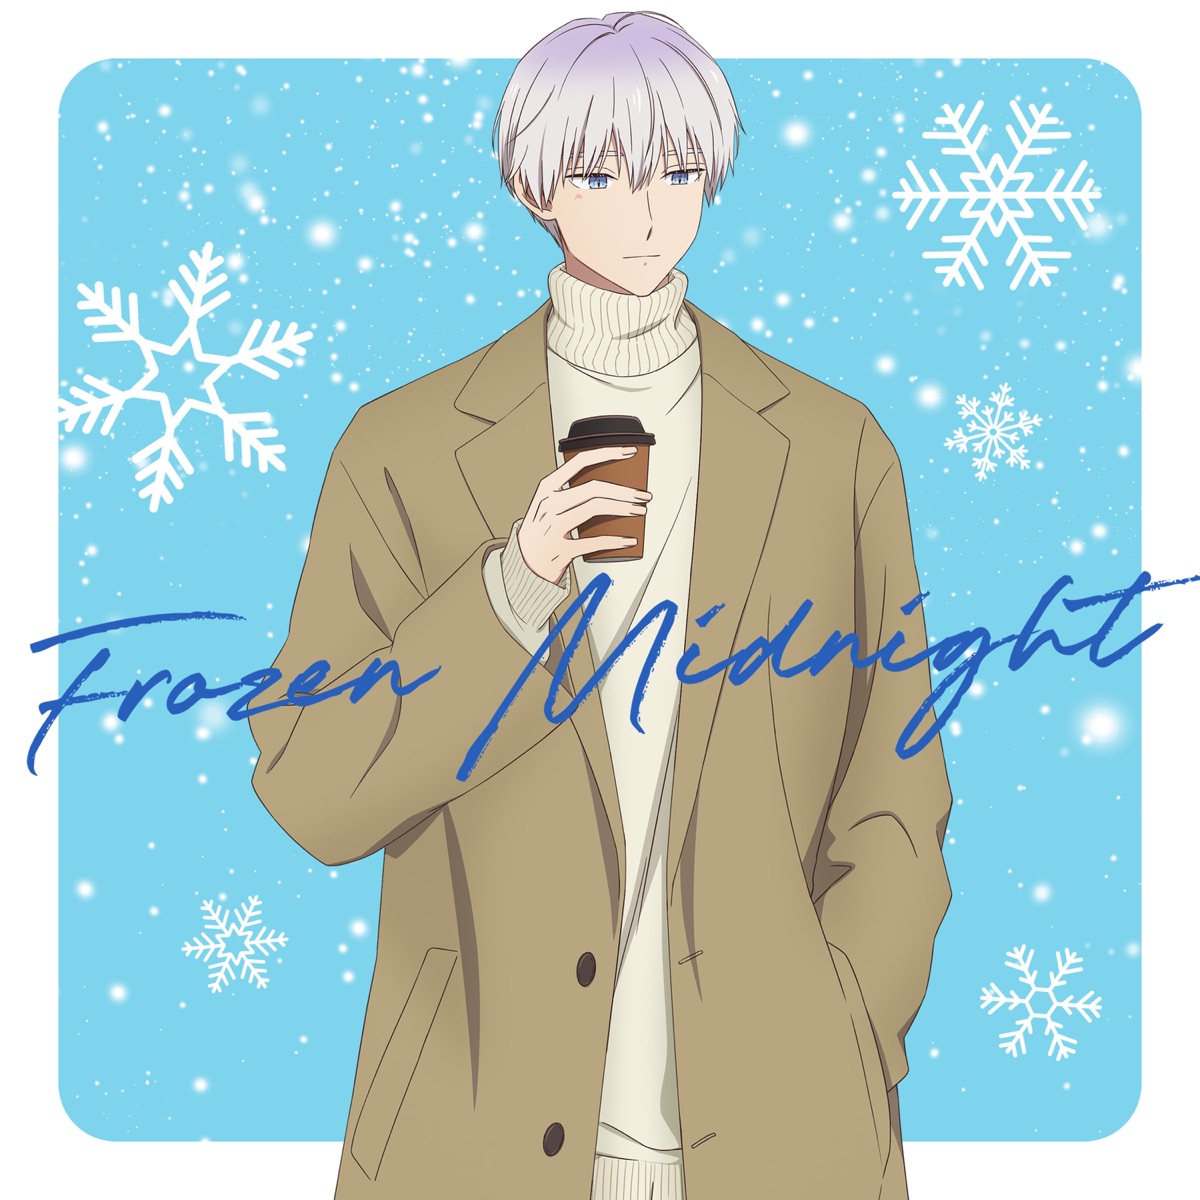 Cover art for『Takao Sakuma - FROZEN MIDNIGHT』from the release『FROZEN MIDNIGHT』